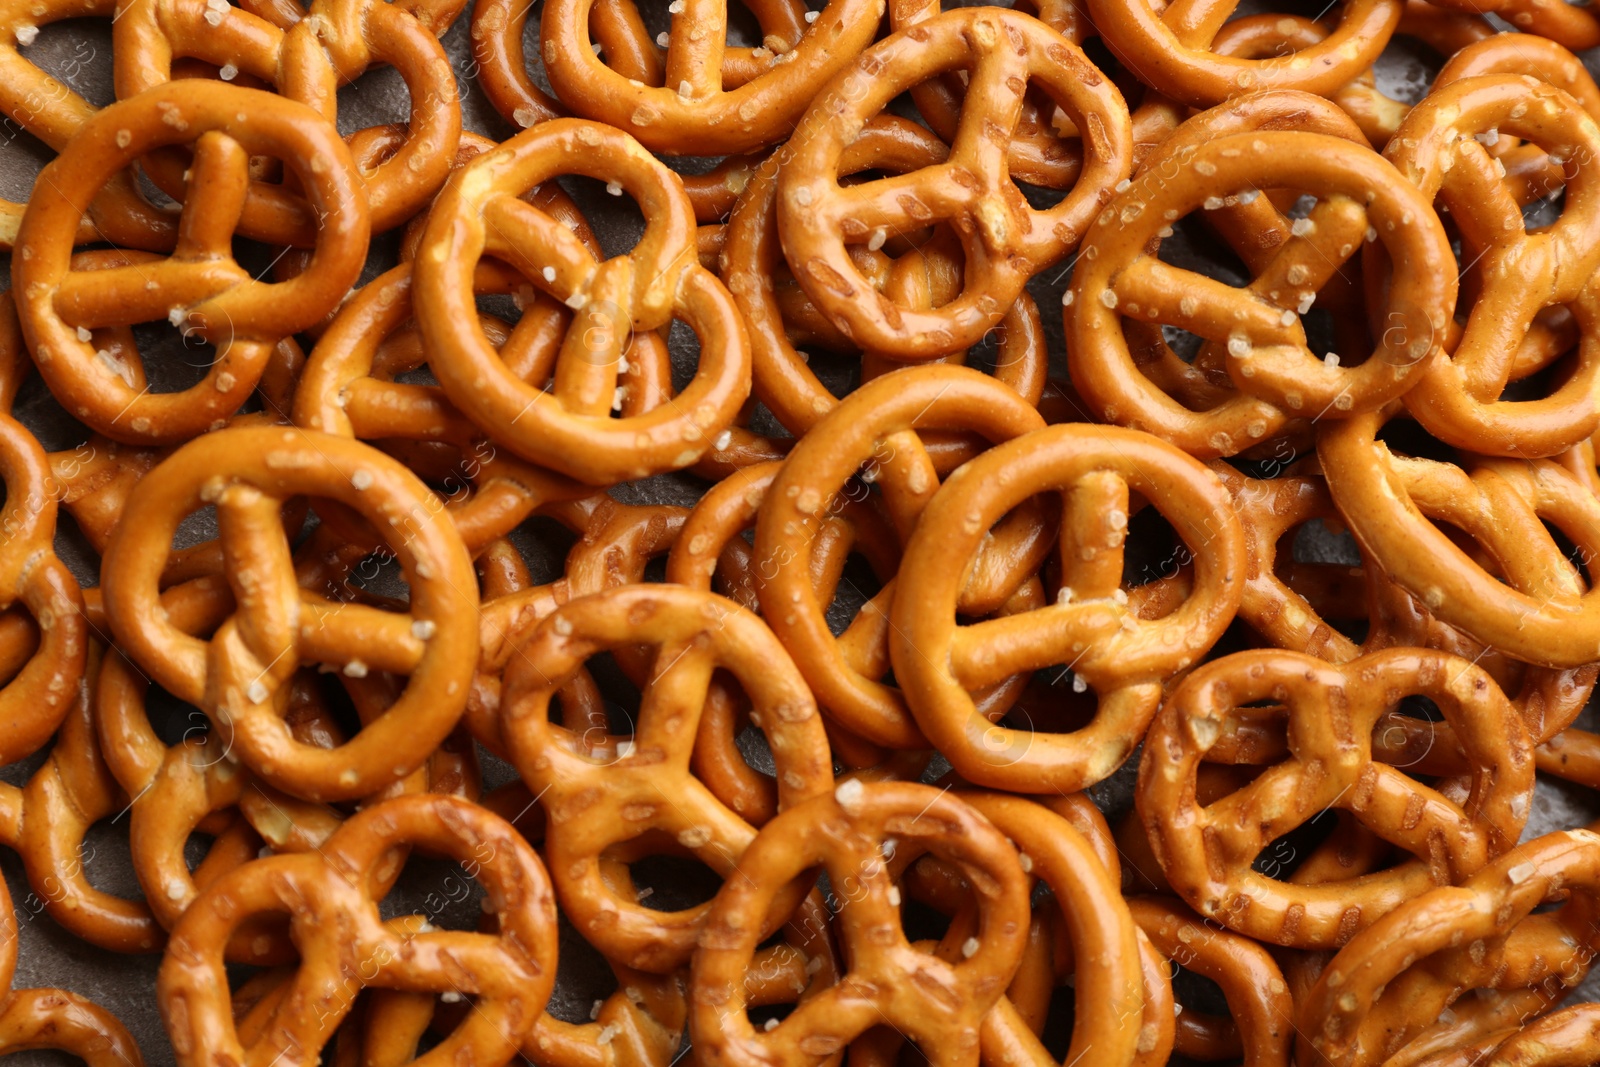 Photo of Many delicious pretzel crackers as background, top view